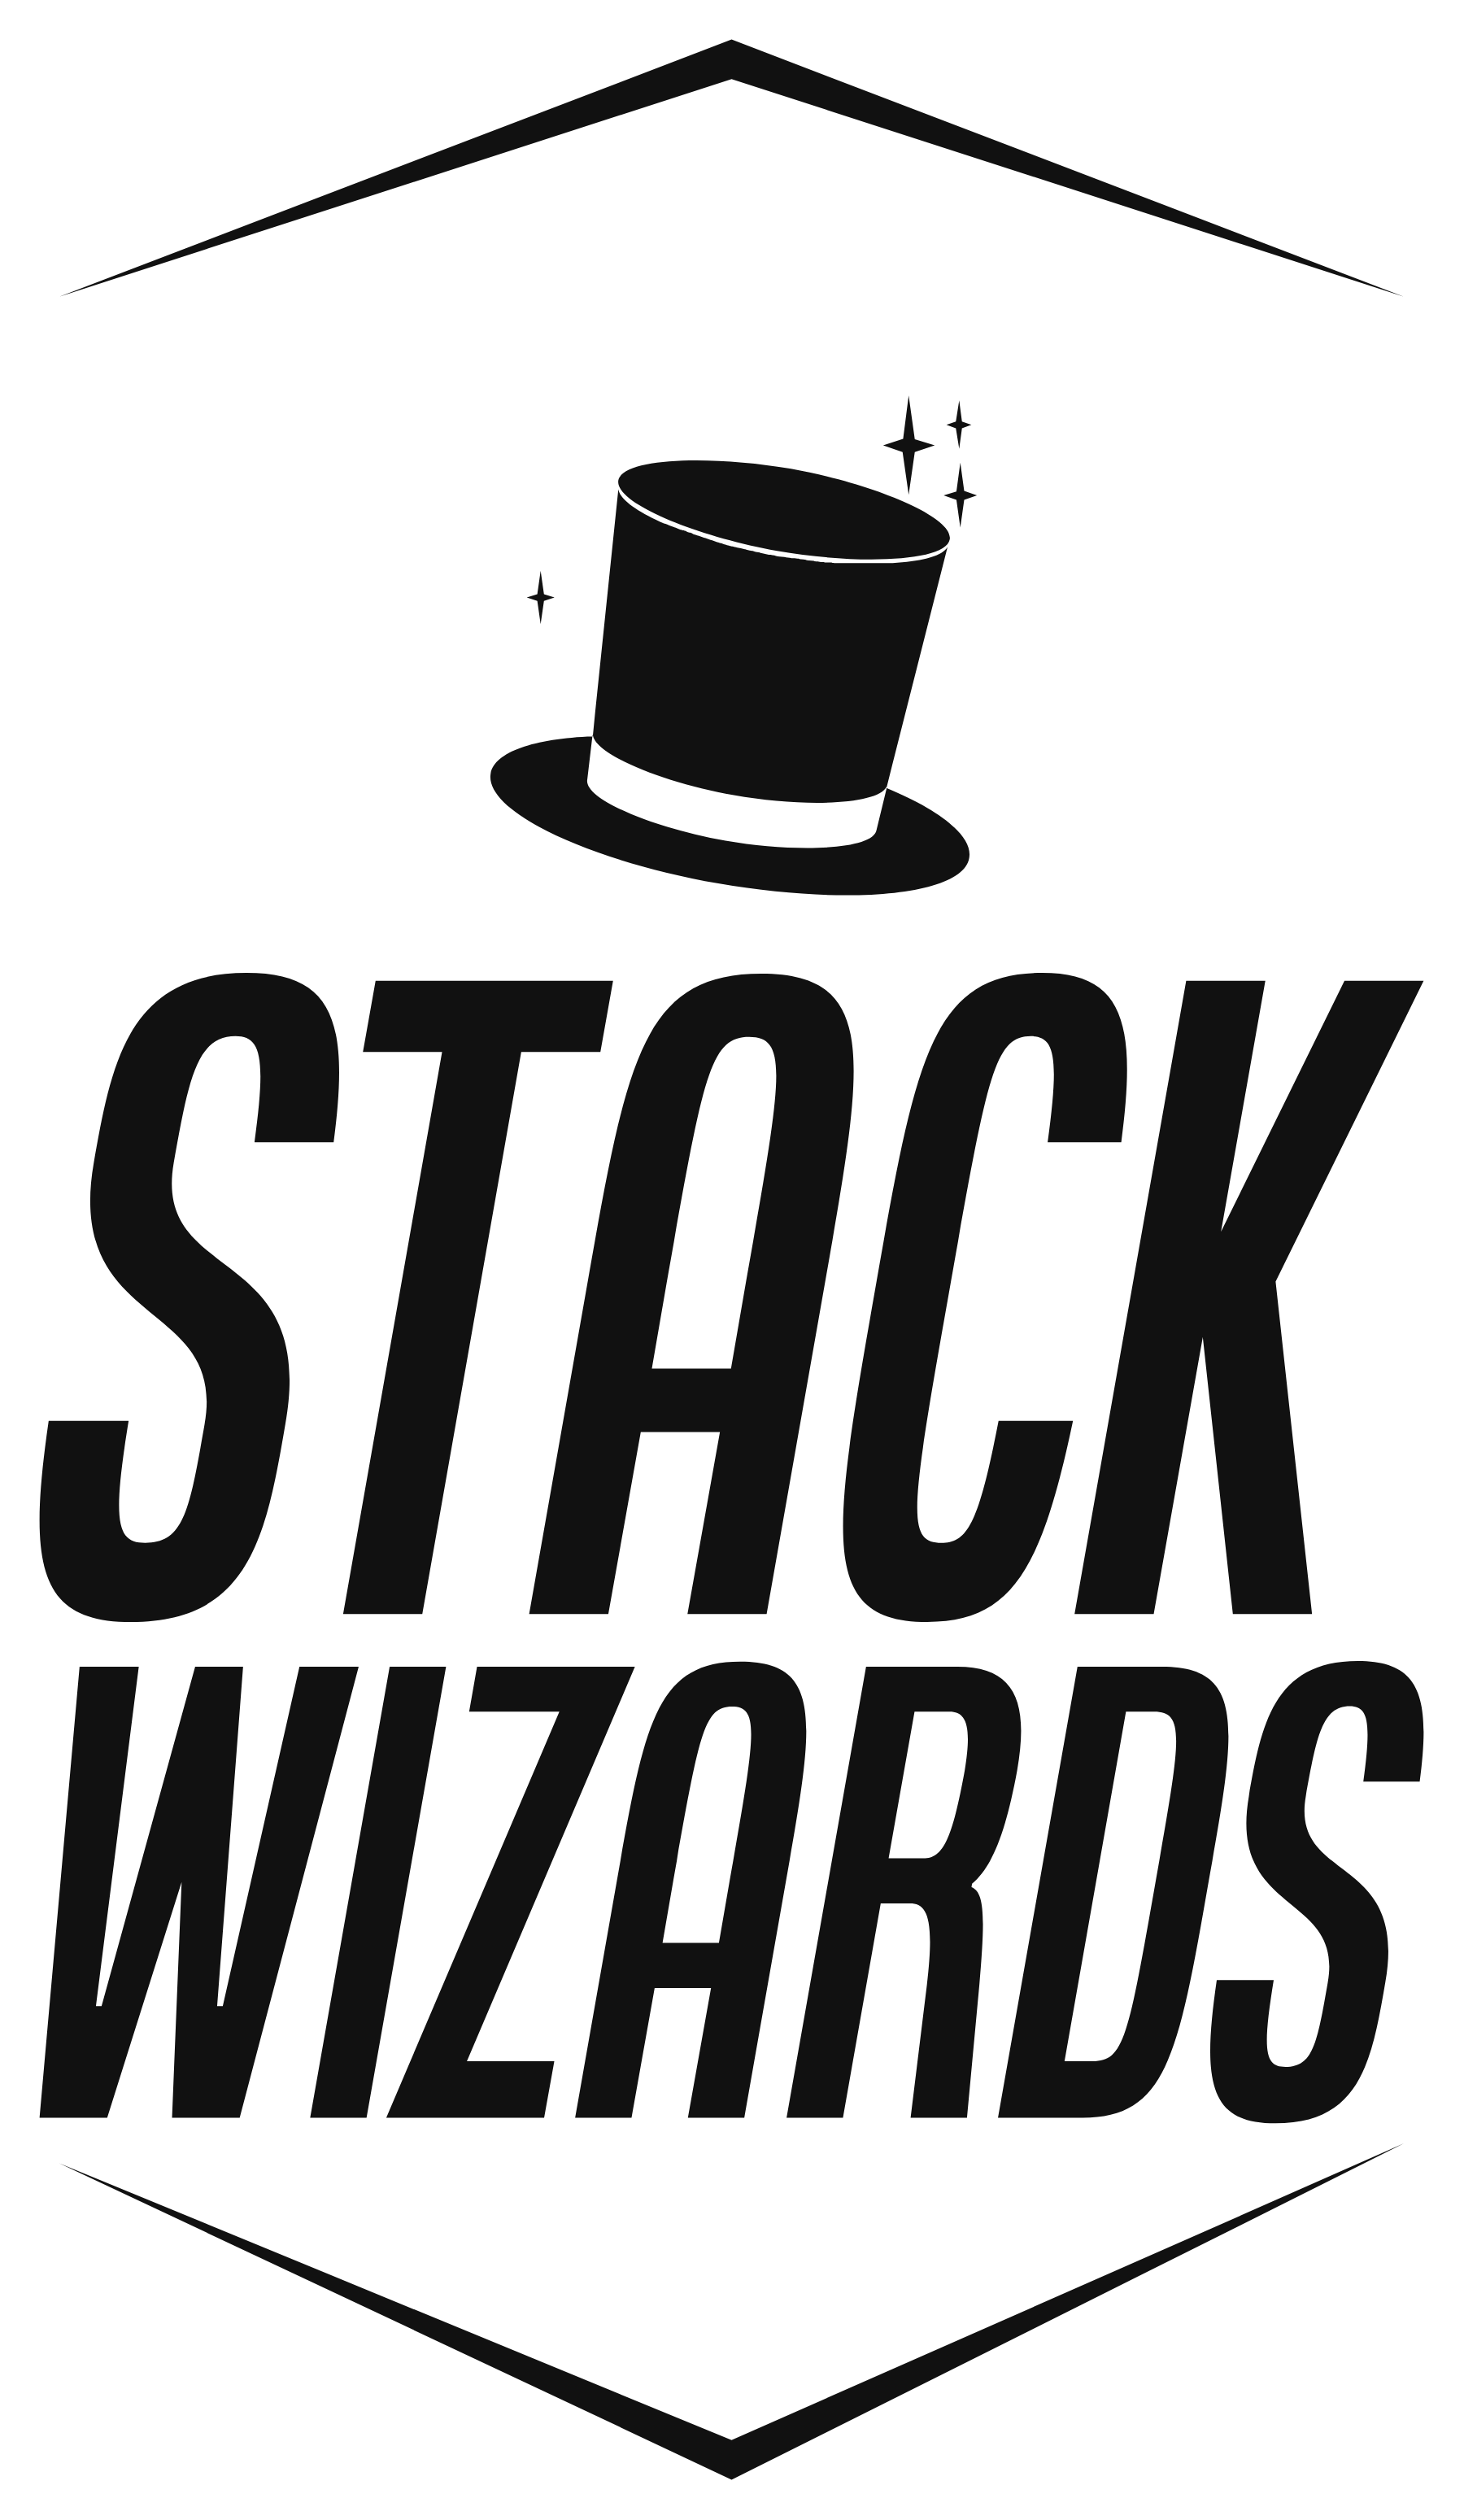 The StackWizards